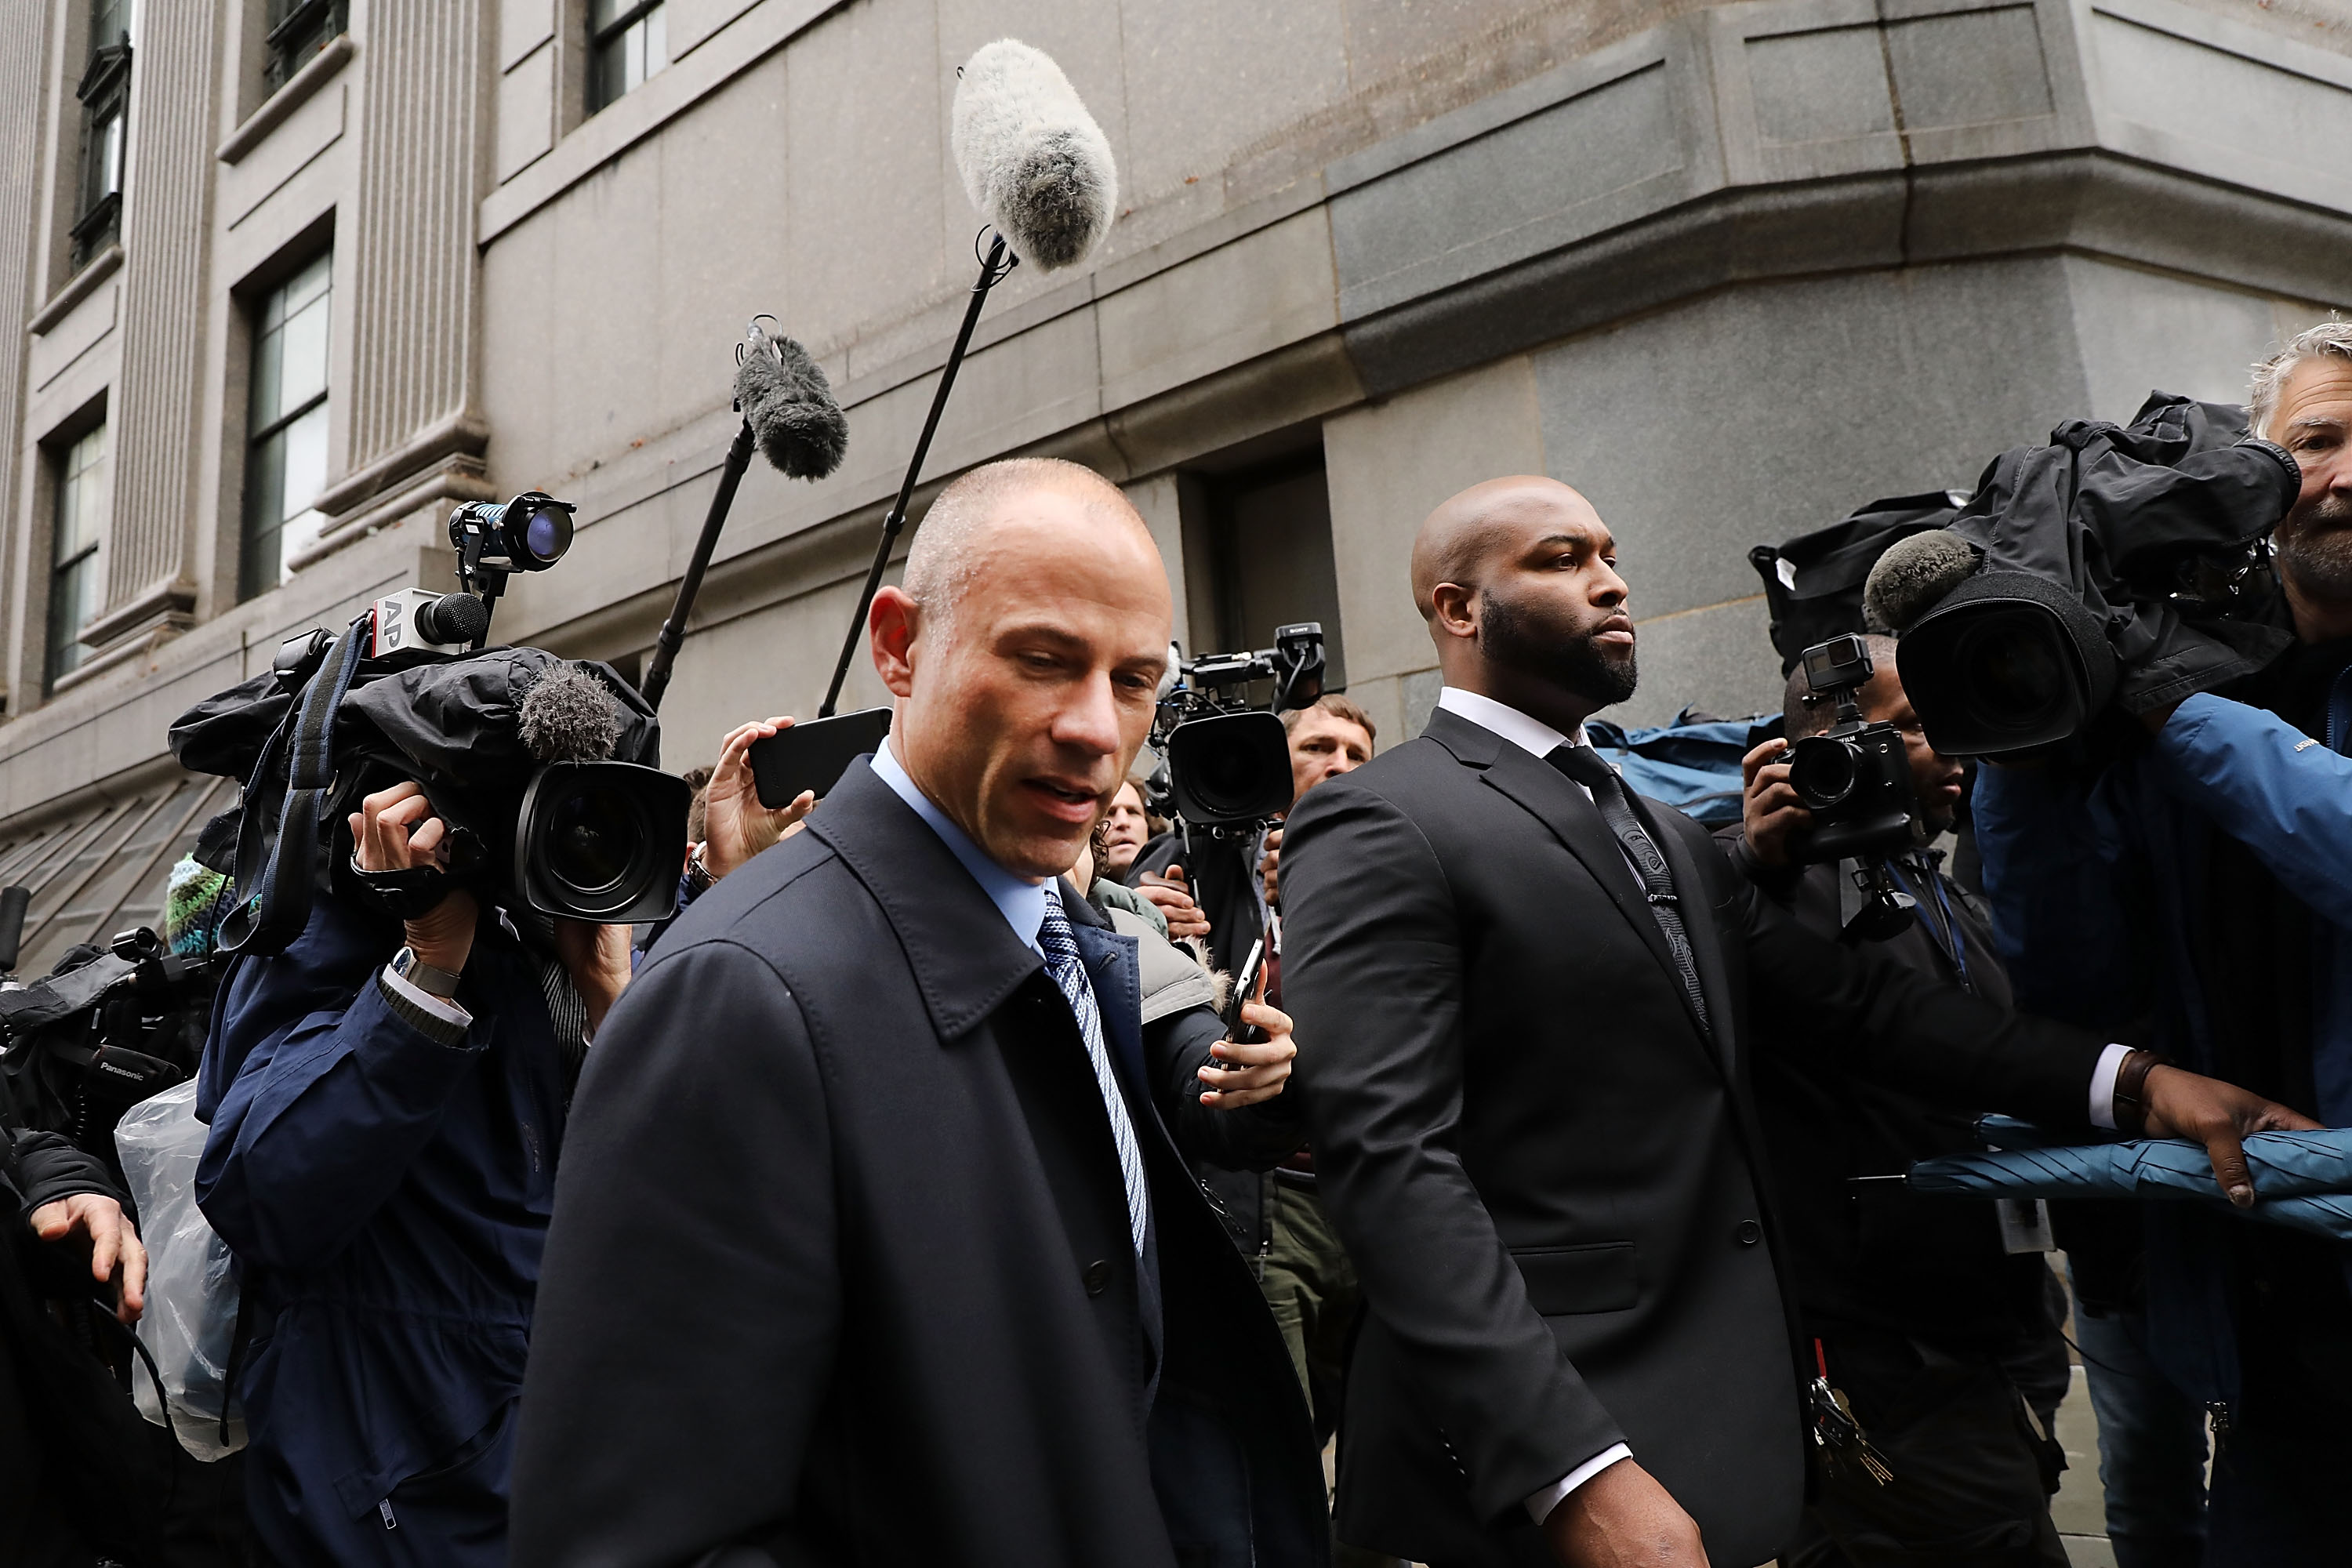 NEW YORK, NY - APRIL 16: Adult-film actress Stormy Daniels' lawyer Michael Avenatti arrives at a court hearing where President Donald Trump's long-time personal attorney Michael Cohen is attending a court hearing on April 16, 2018 in New York City. Trump's lawyers on Sunday night asked a federal judge to temporarily block prosecutors from reviewing files seized by the FBI from Cohen's offices and hotel room last week. Trump's lawyers have argued that many of the documents are protected by attorney-client privilege. (Photo by Spencer Platt/Getty Images)